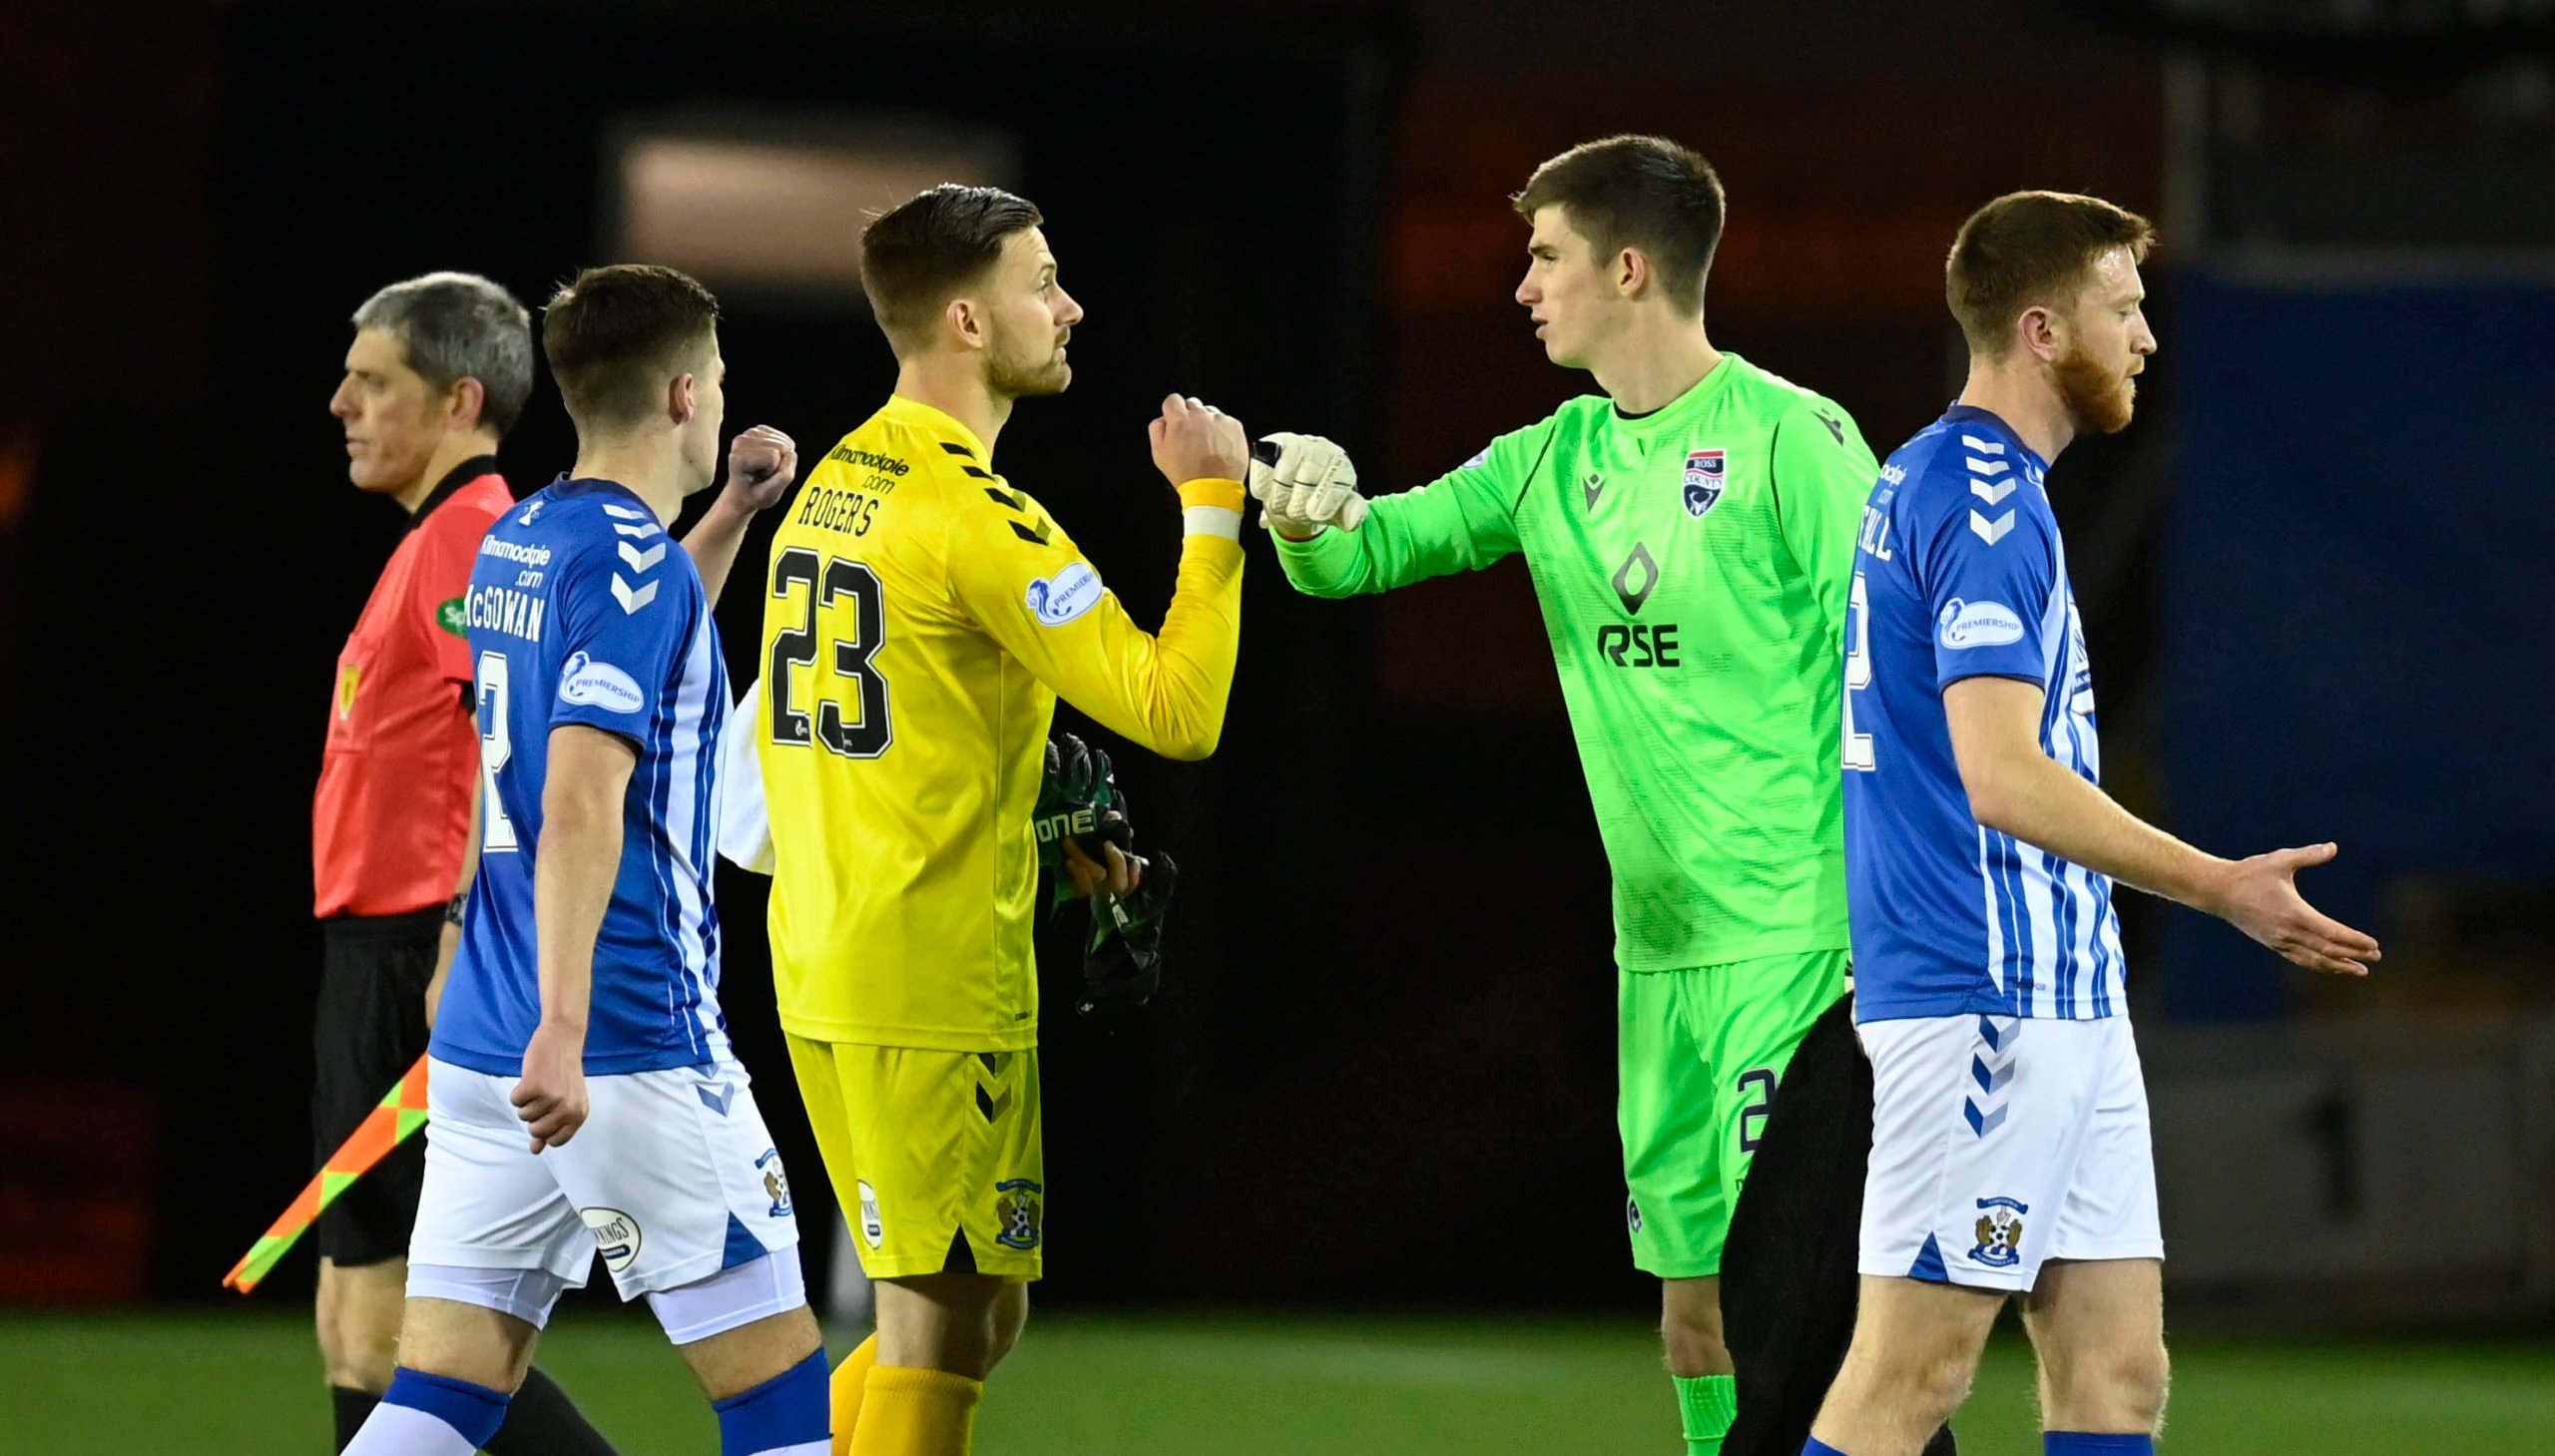 Celtic loanee Ross Doohan's Tranmere spell showing concerning signs already